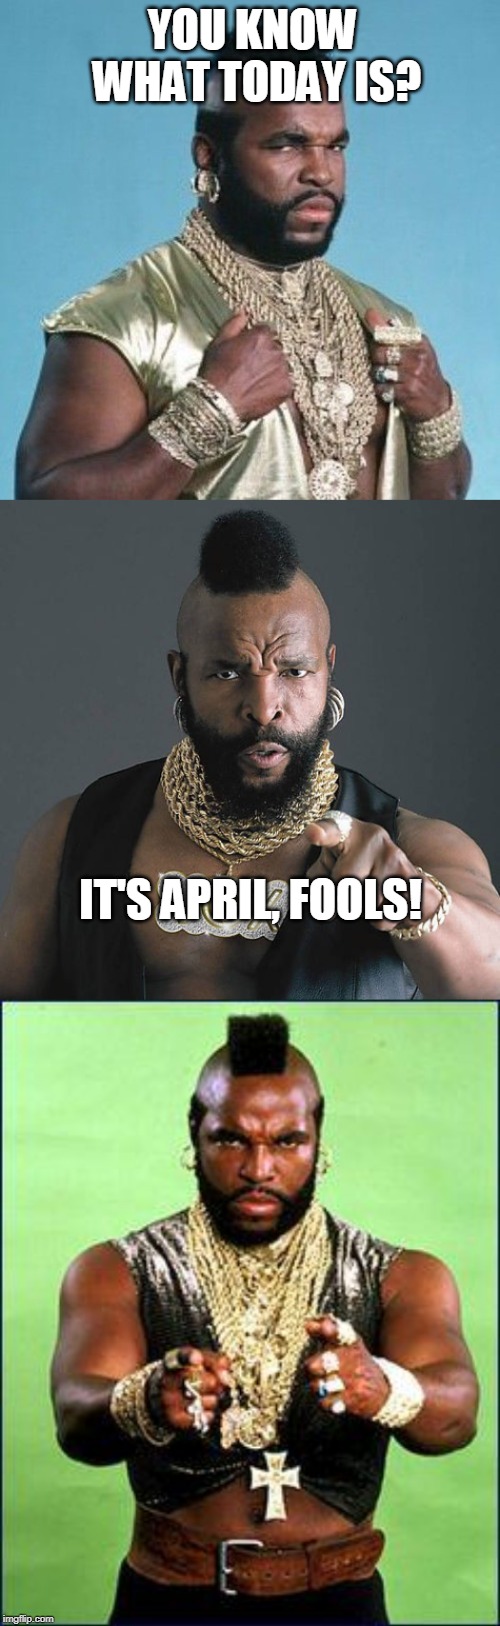 Bad Pun Mr. T | YOU KNOW WHAT TODAY IS? IT'S APRIL, FOOLS! | image tagged in memes,mr t pity the fool,mrt,april fools | made w/ Imgflip meme maker